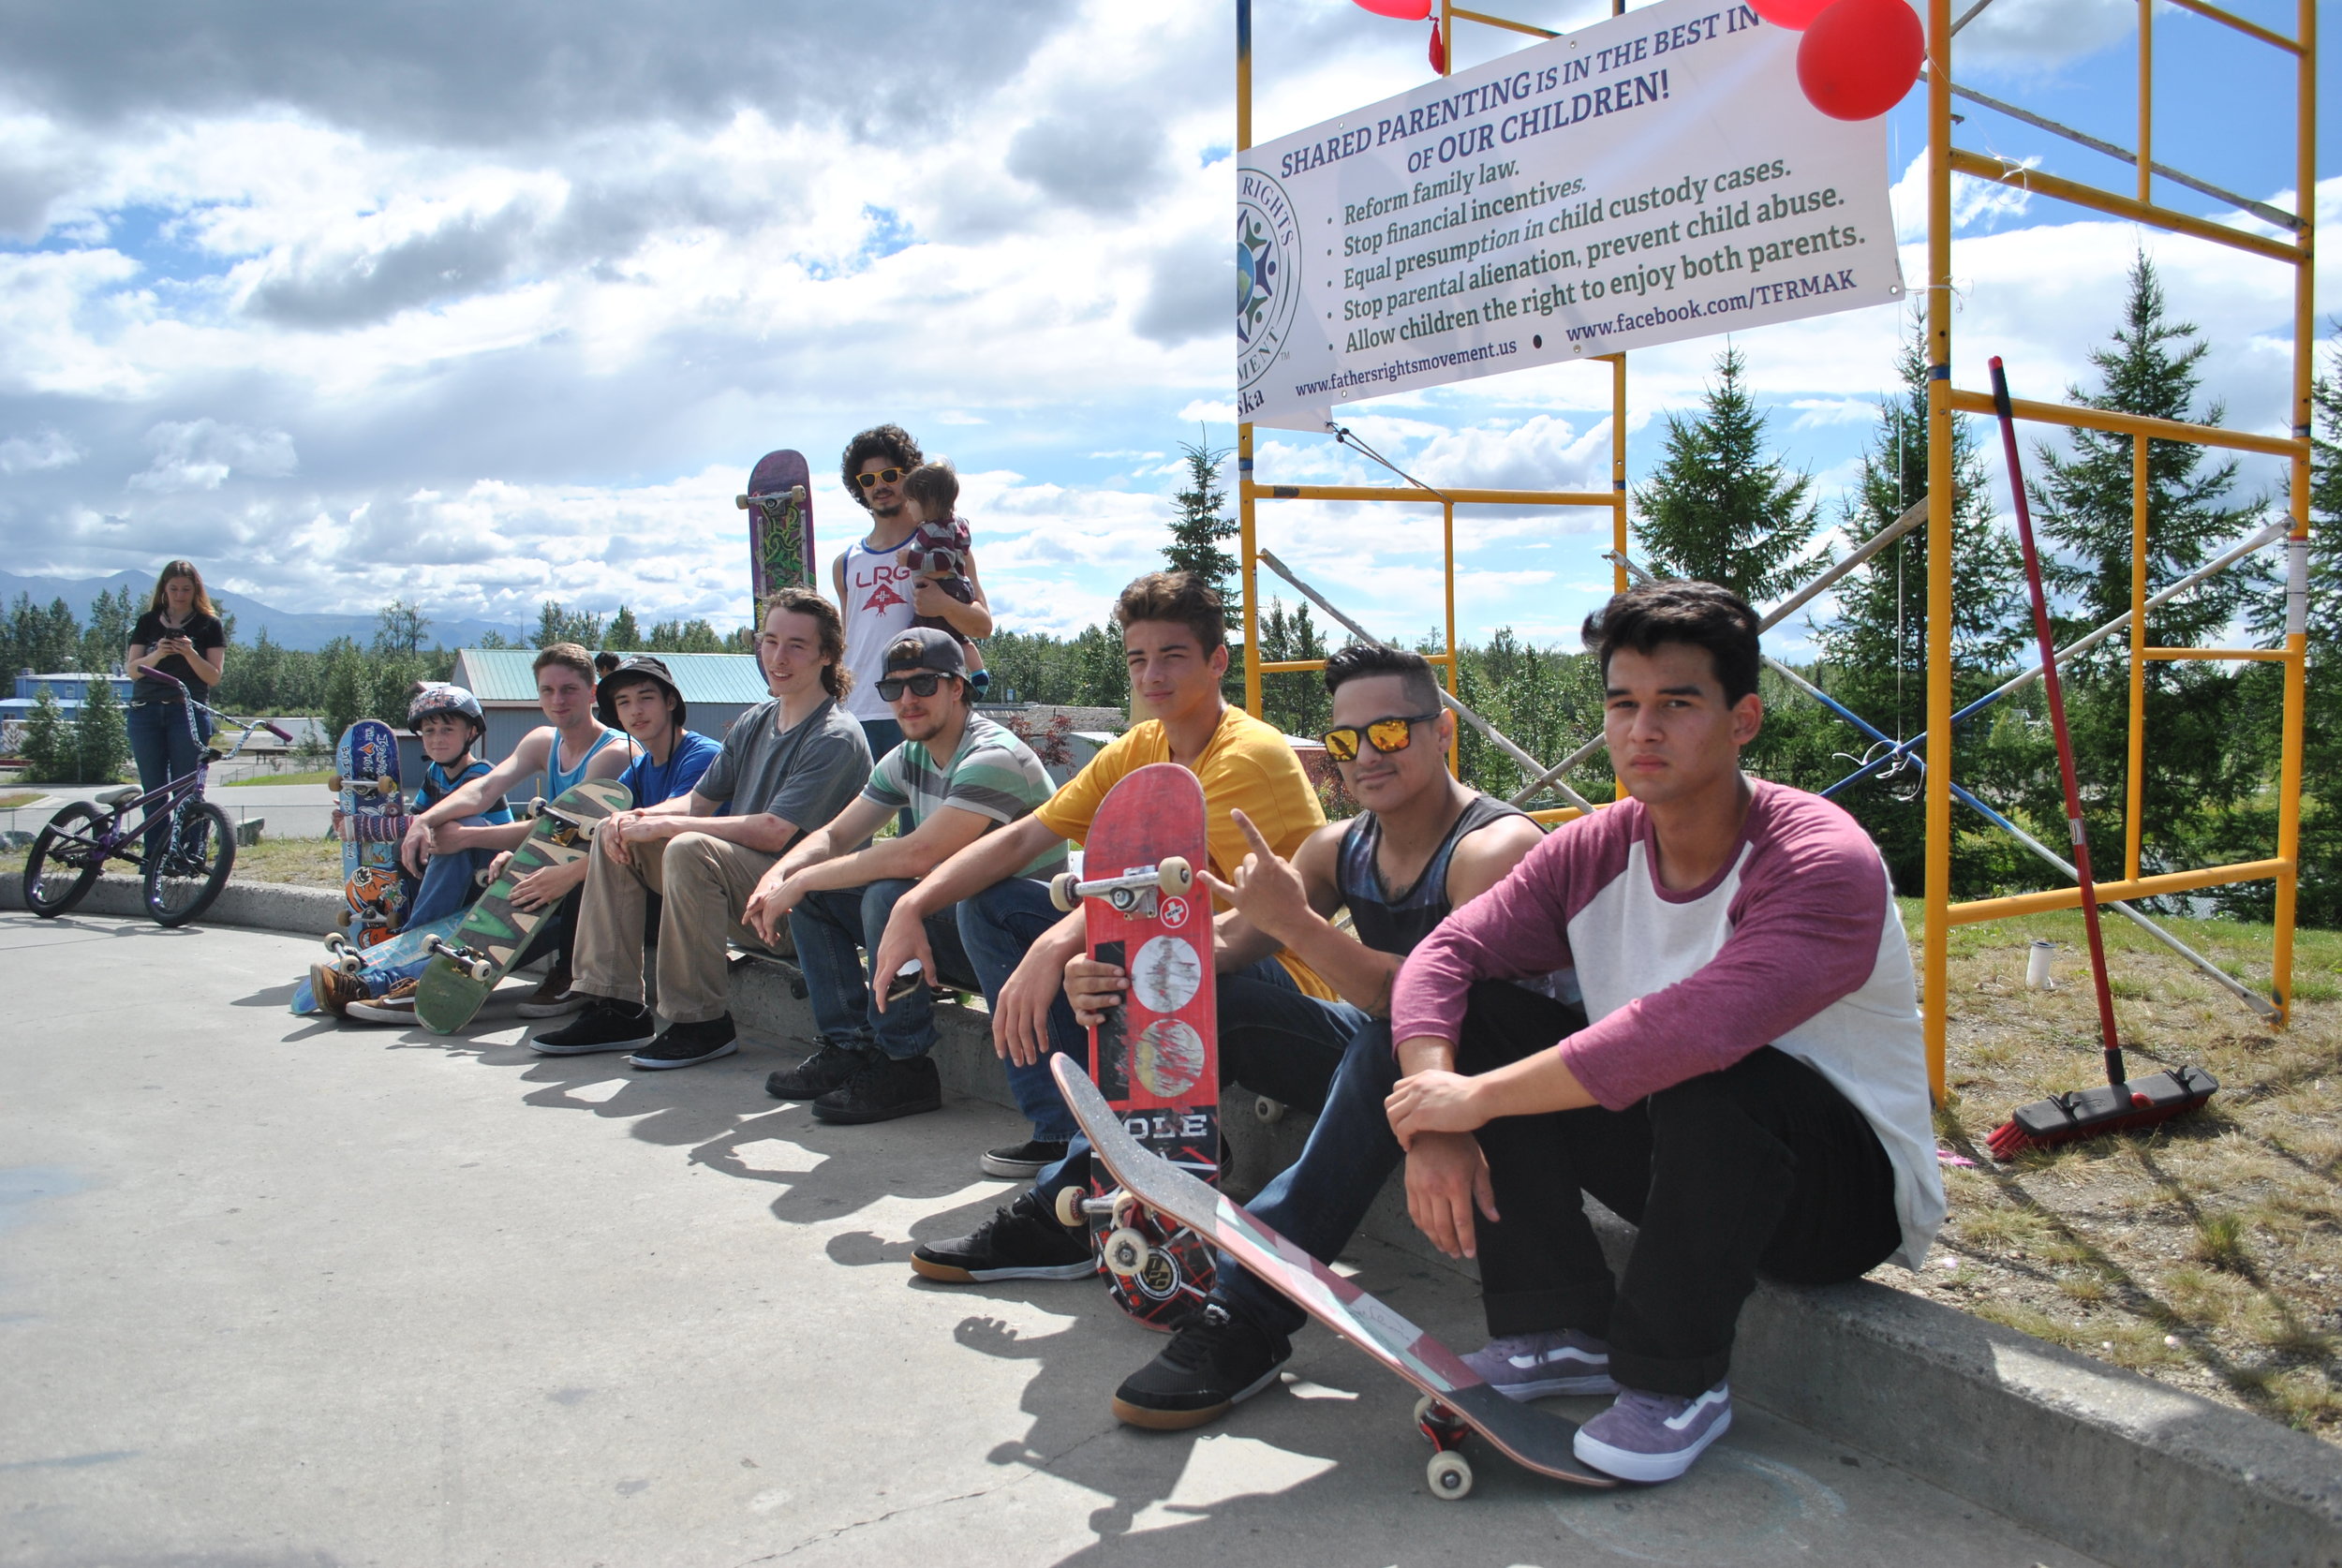 COMMUNITY - The AK Fathers’ Rights Movement Sponsored 5050 Grind Skateboard Competition Brings Skaters & Families Together 1 - Copy.JPG